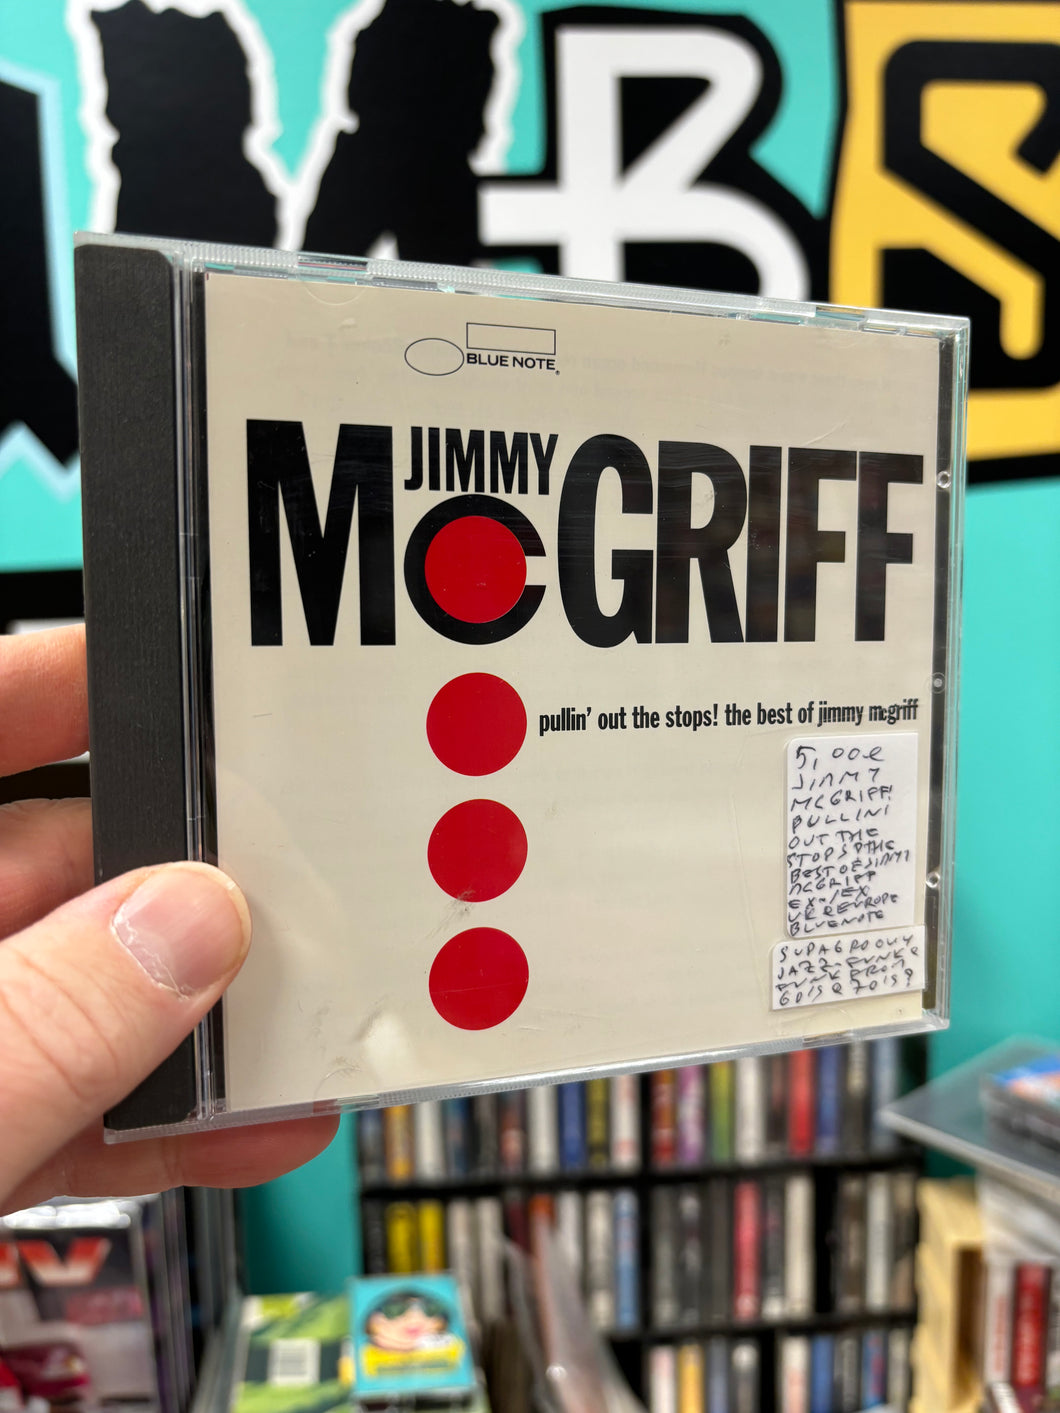 Jimmy McGriff: Pullin’ Out The Stops! The Best Of Jimmy McGriff, CD, UK & Europe 1994